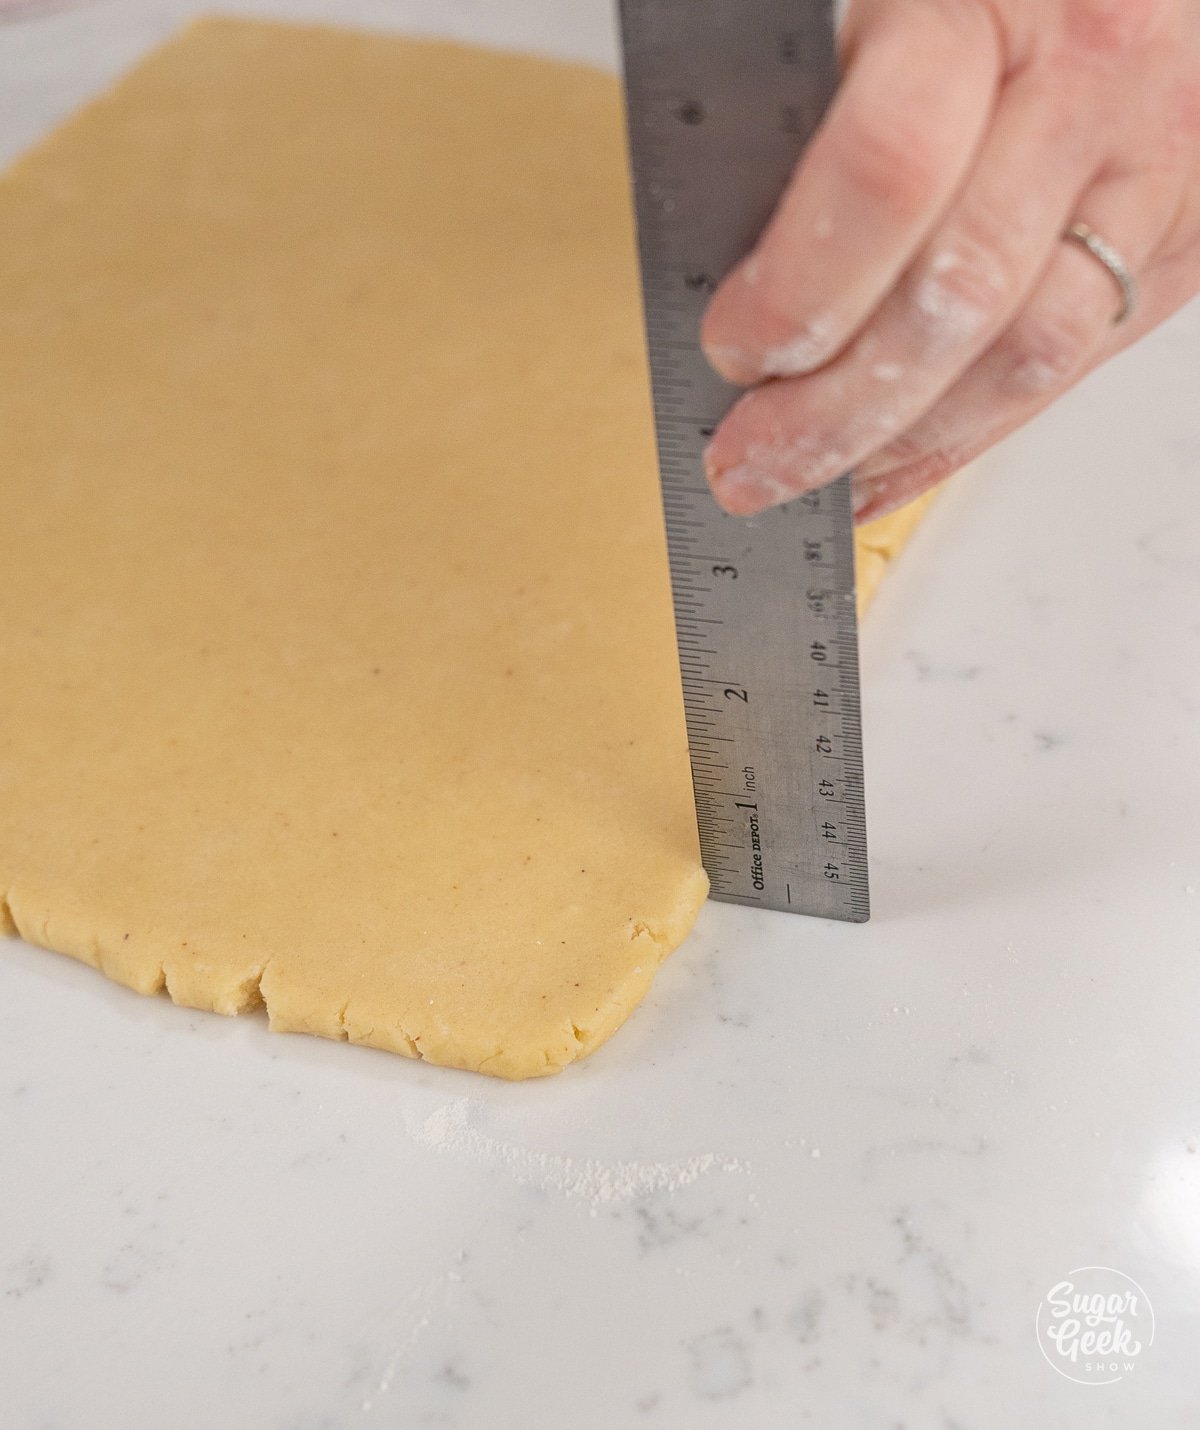 Ruler places along dough to show ¼ inch.